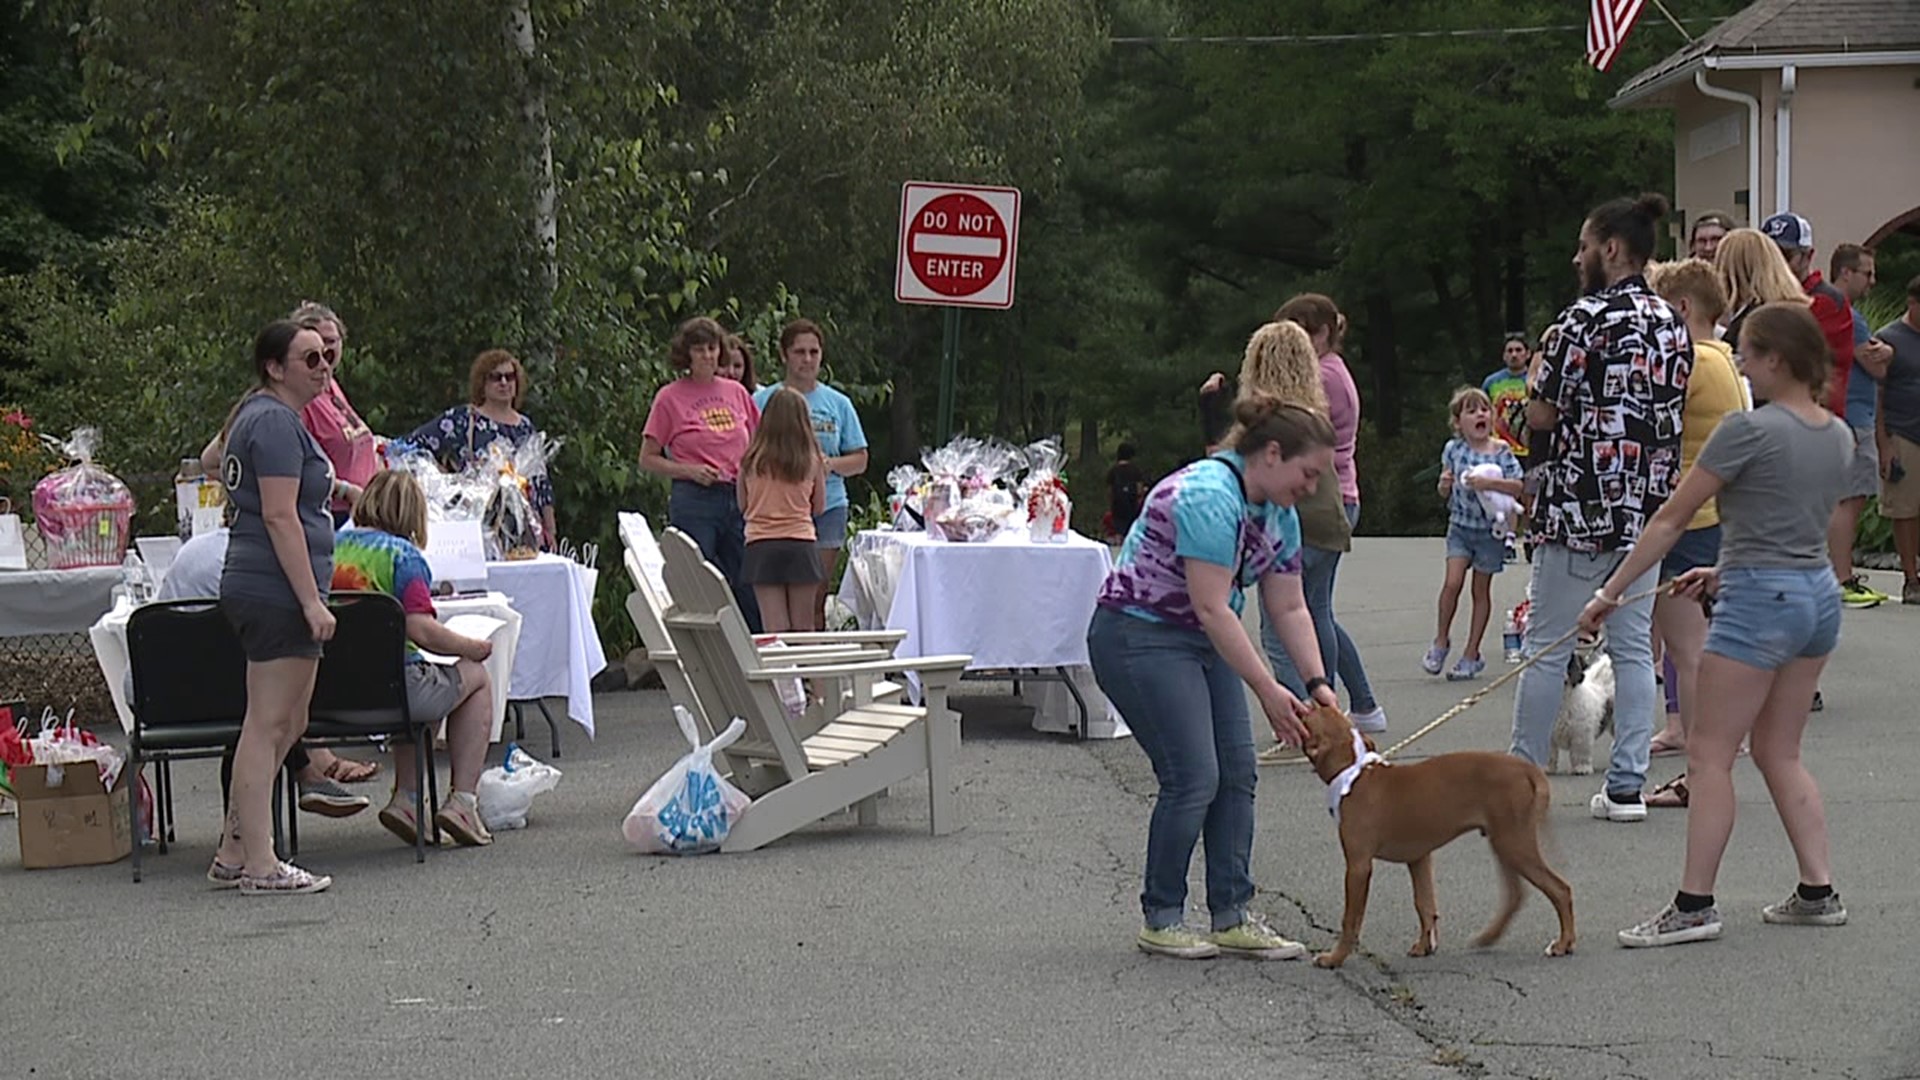 It was a day filled with fun and community support as St. Cats & Dogs of the Nay Aug Zoo held its 3rd annual Paws in the Park event.